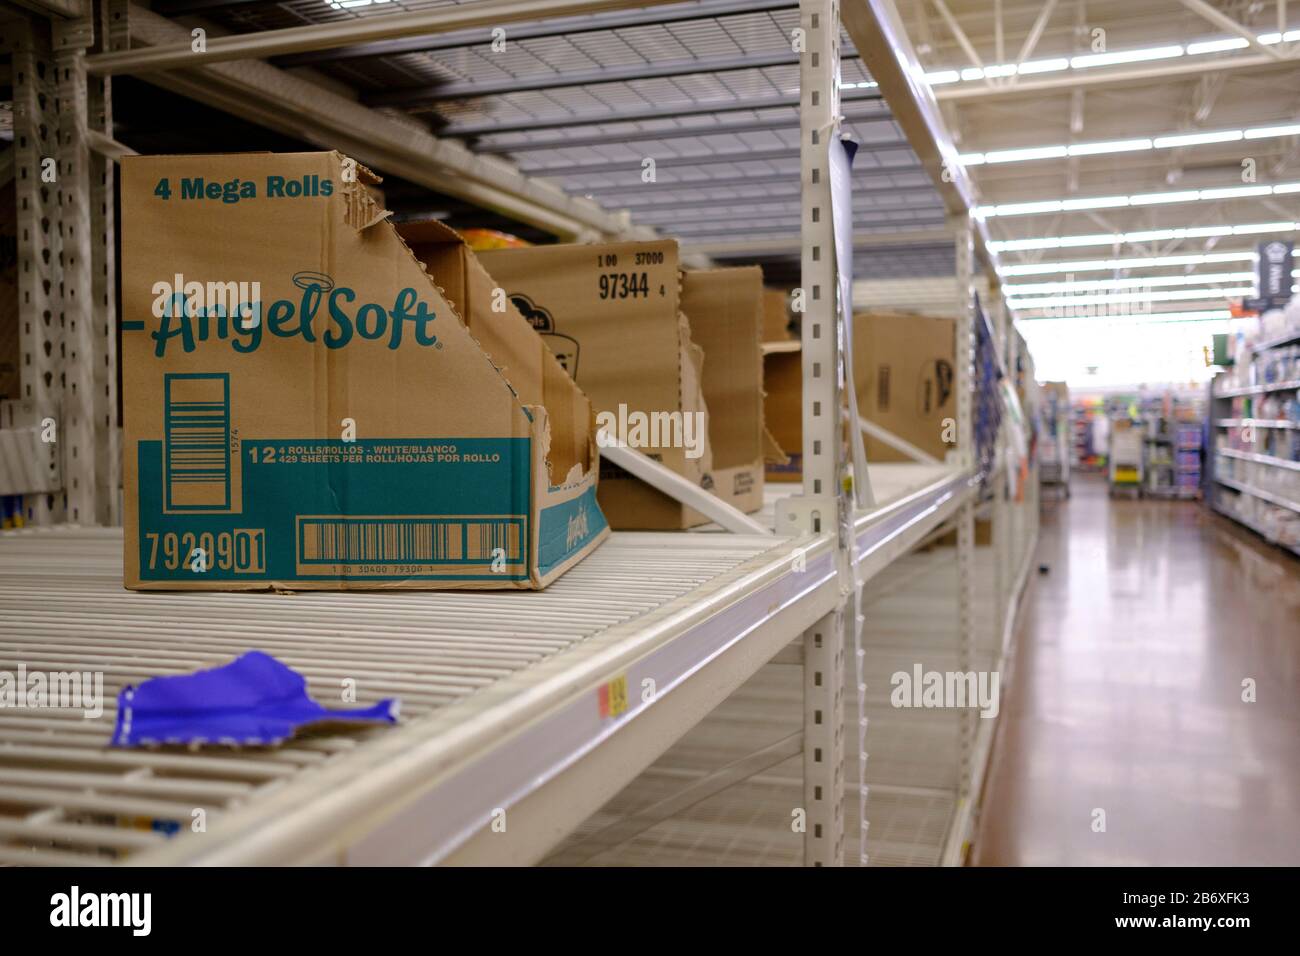 View of toilet paper shelves emptied by panic buyers at Menards on the day World Health Organization declared Coronavirus to be a pandemic.Toilet paper, wipes, protective breathing masks, and other items are either sold out at local stores, or are in short supply. Stock Photo